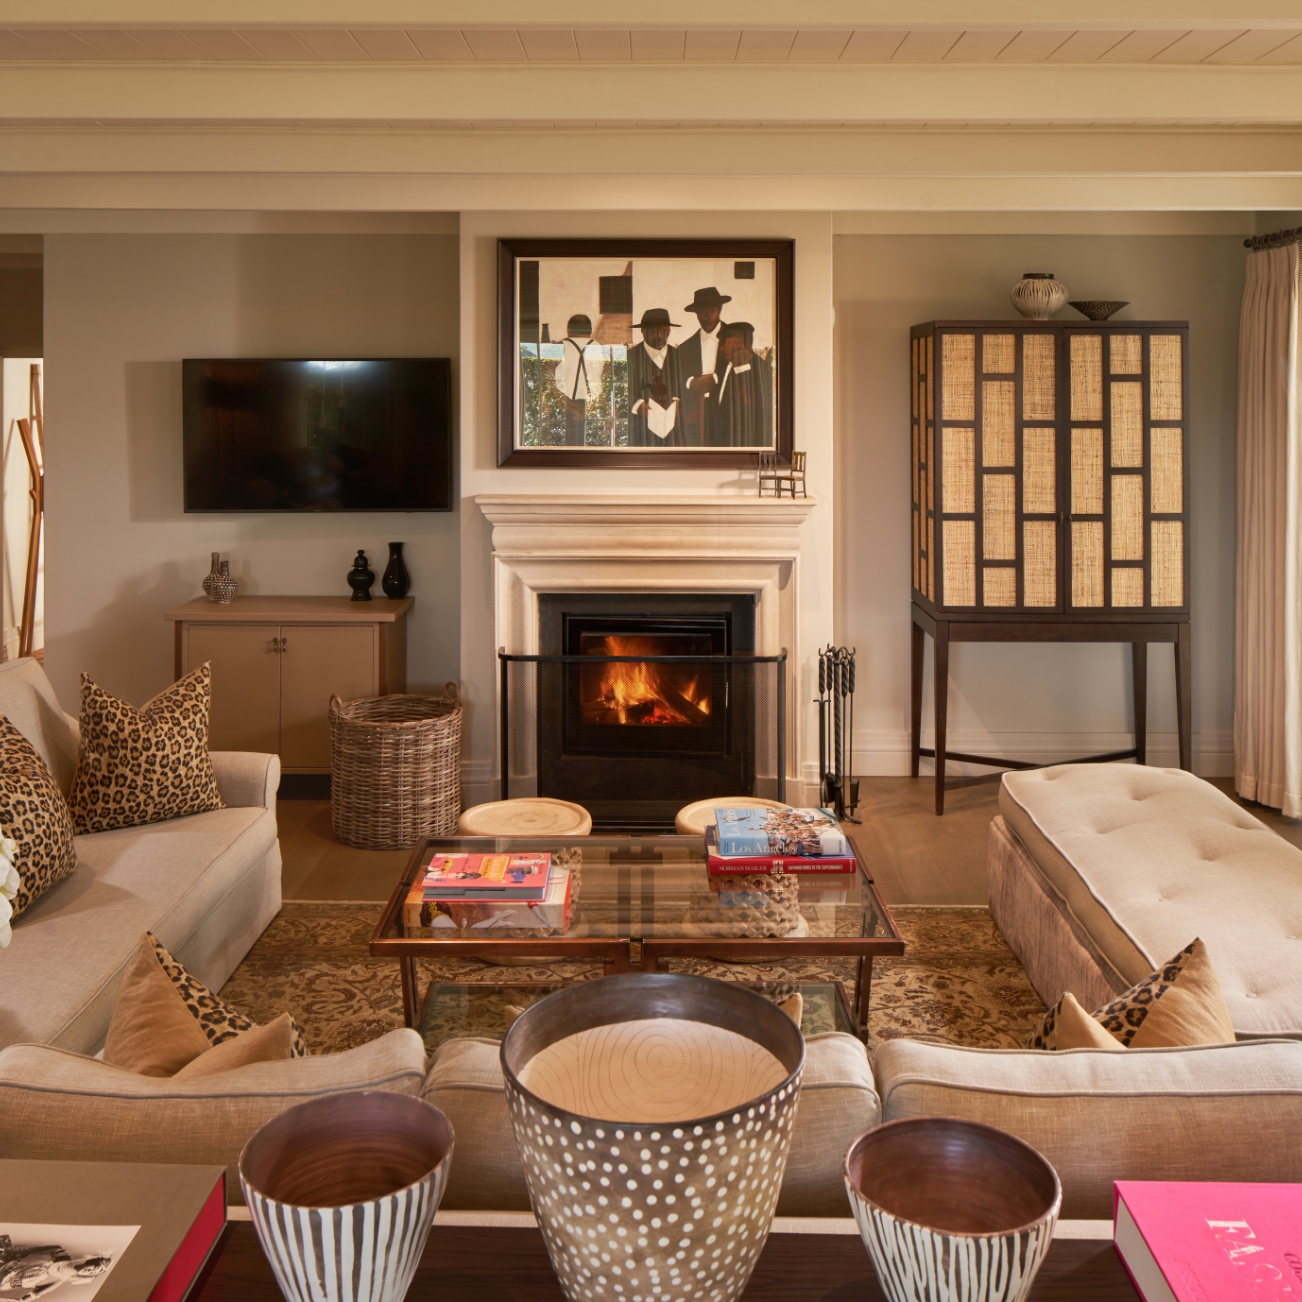 Leeucollection blog - Discover the Exclusive Cottages of Leeu Estates 1